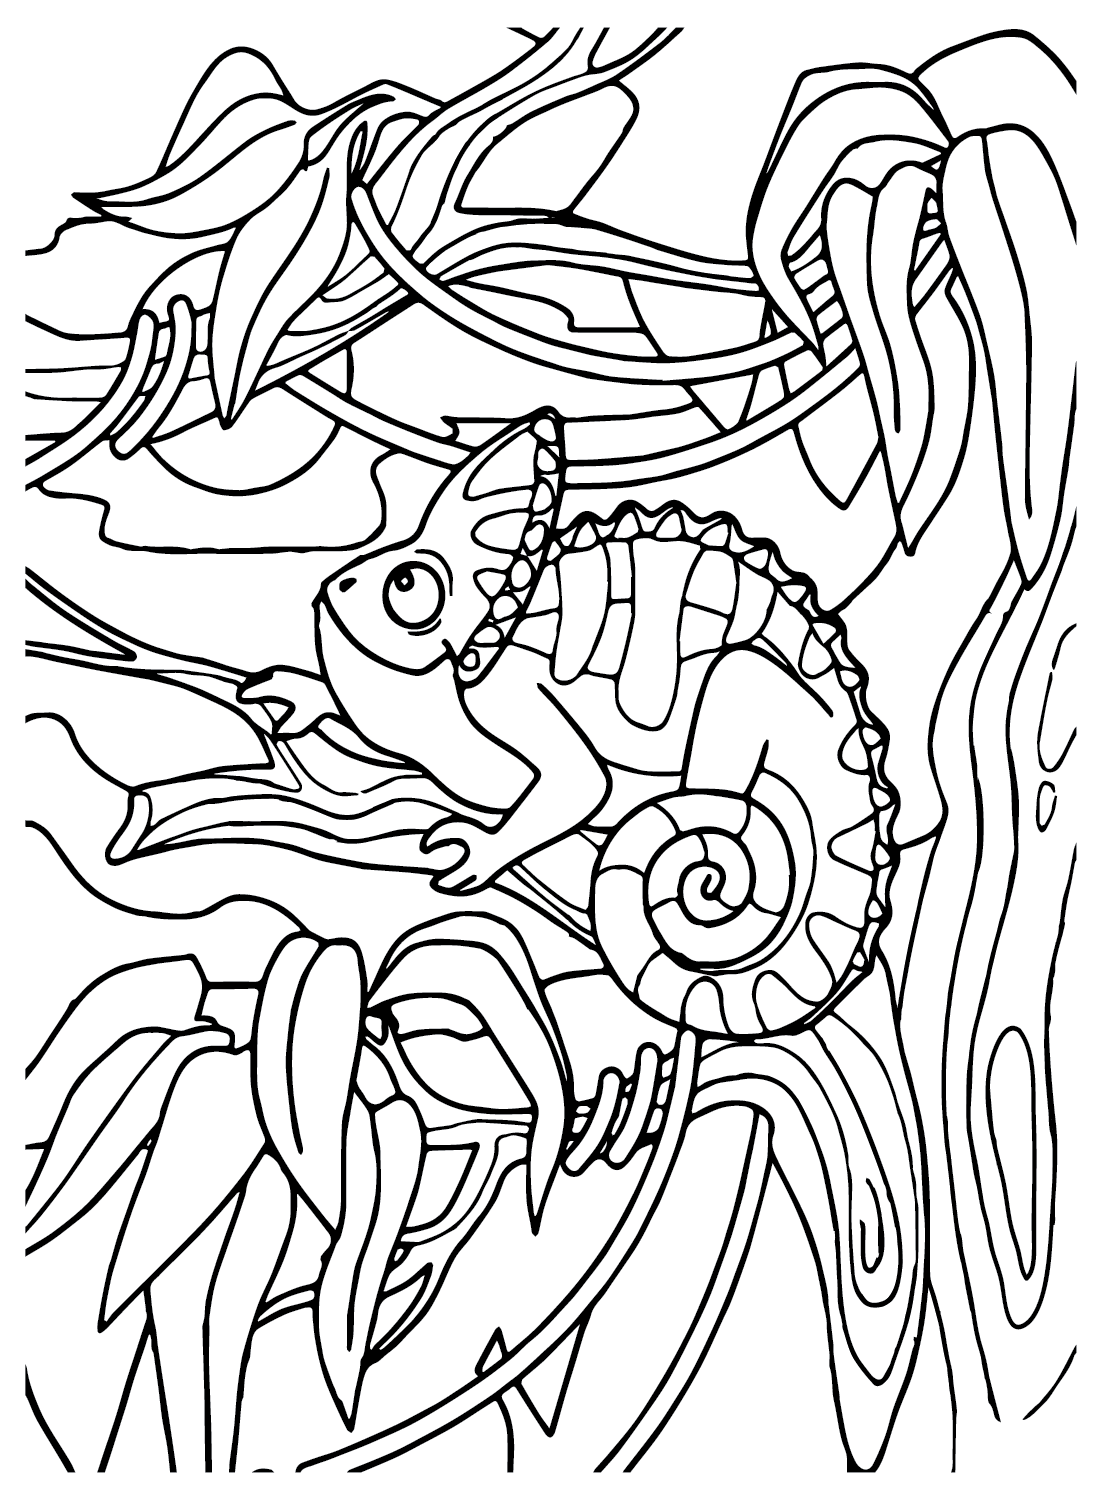 Chameleon Coloring Page PDF - Free Printable Coloring Pages